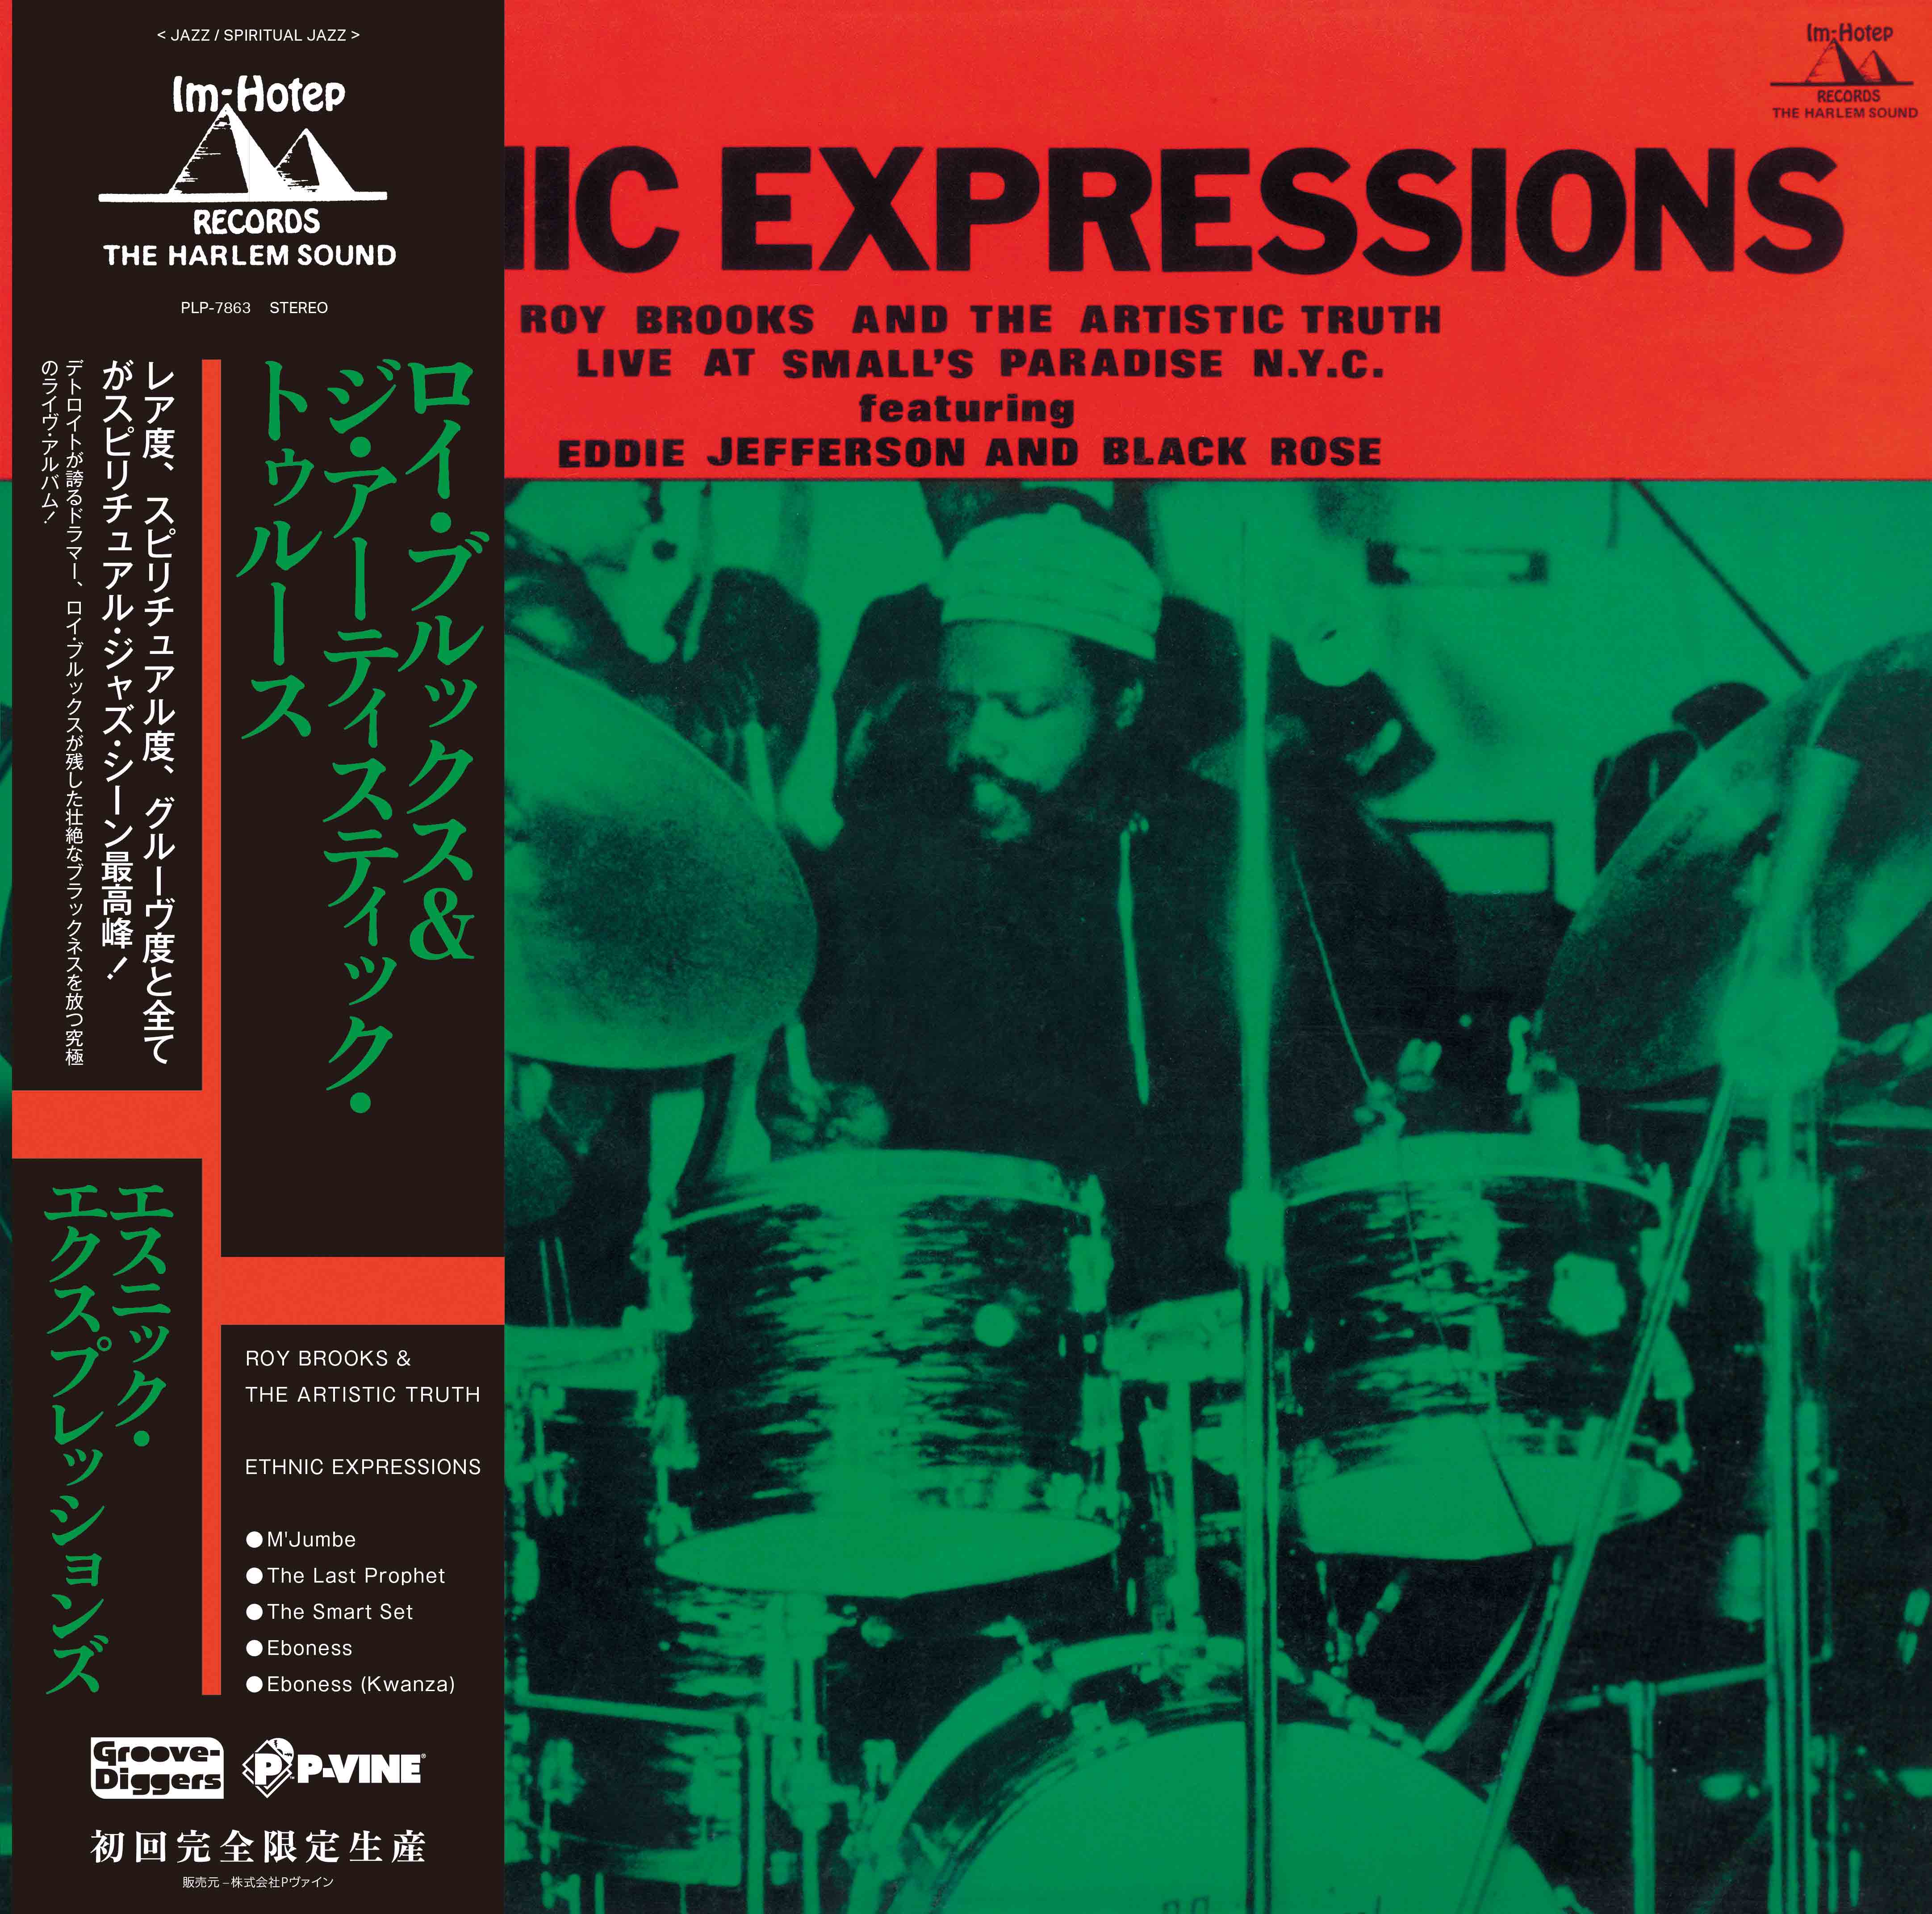 ROY BROOKS & THE ARTISTIC TRUTH「Ethnic Expressions」